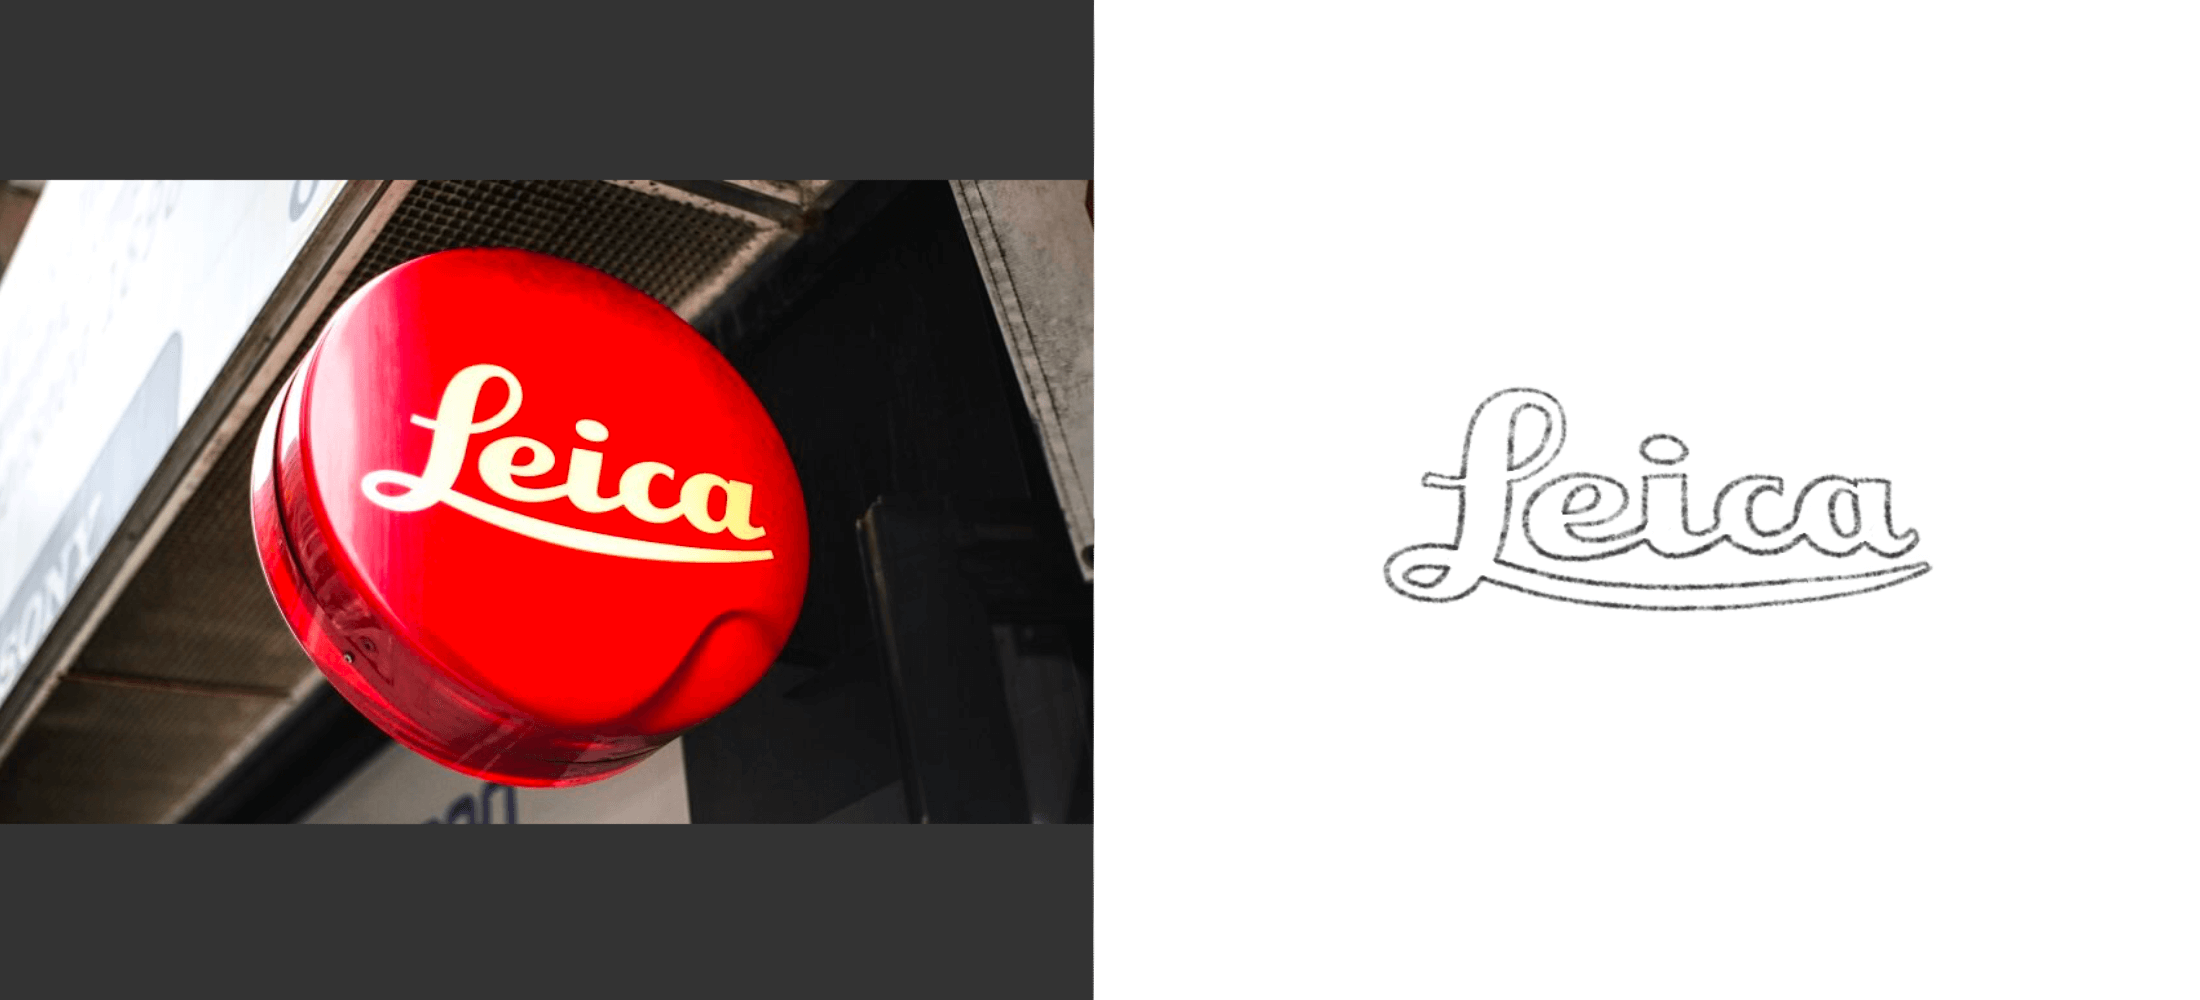 Shining Leica logo hanging at the side of a Leica store alongside a drawn version of the Leica logo